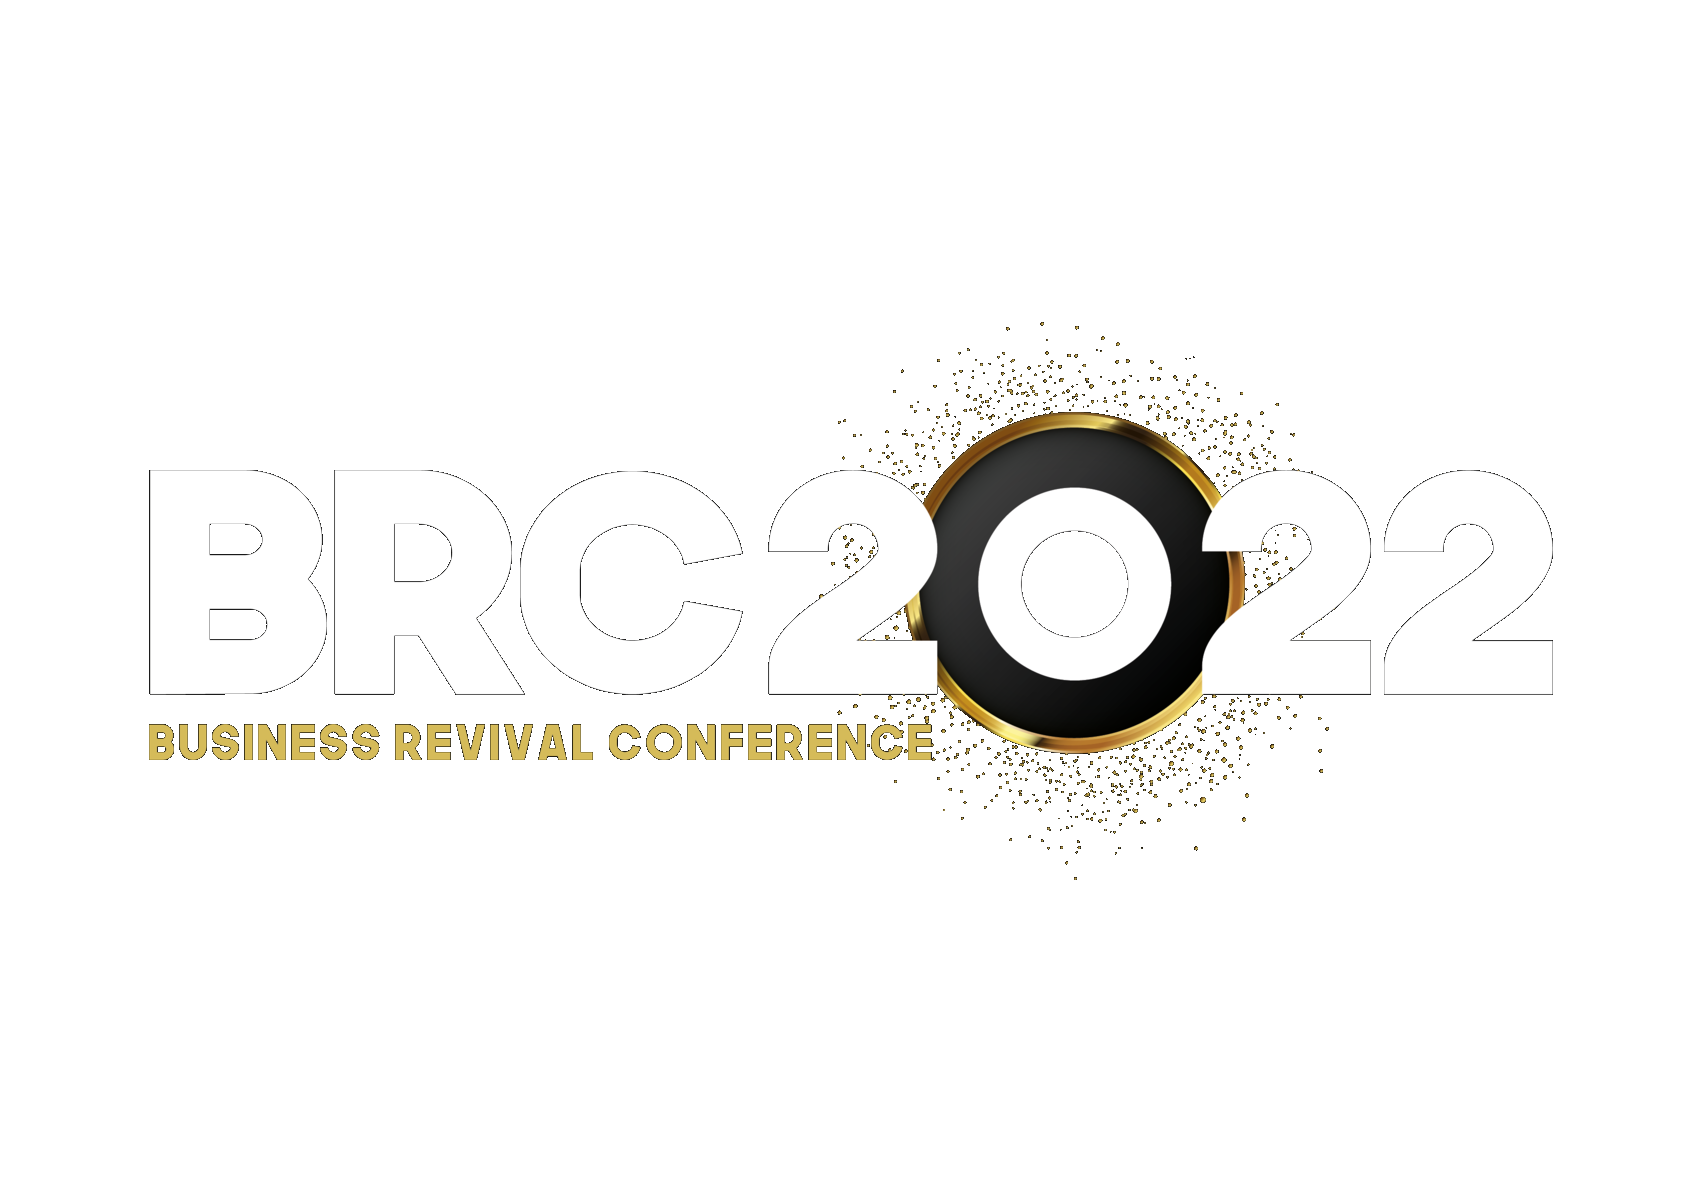 BRC 2022 Logo; BRC 2022 in white text with a black and gold circle around the 0 of 2022. Business Revival Conference written underneath in gold.